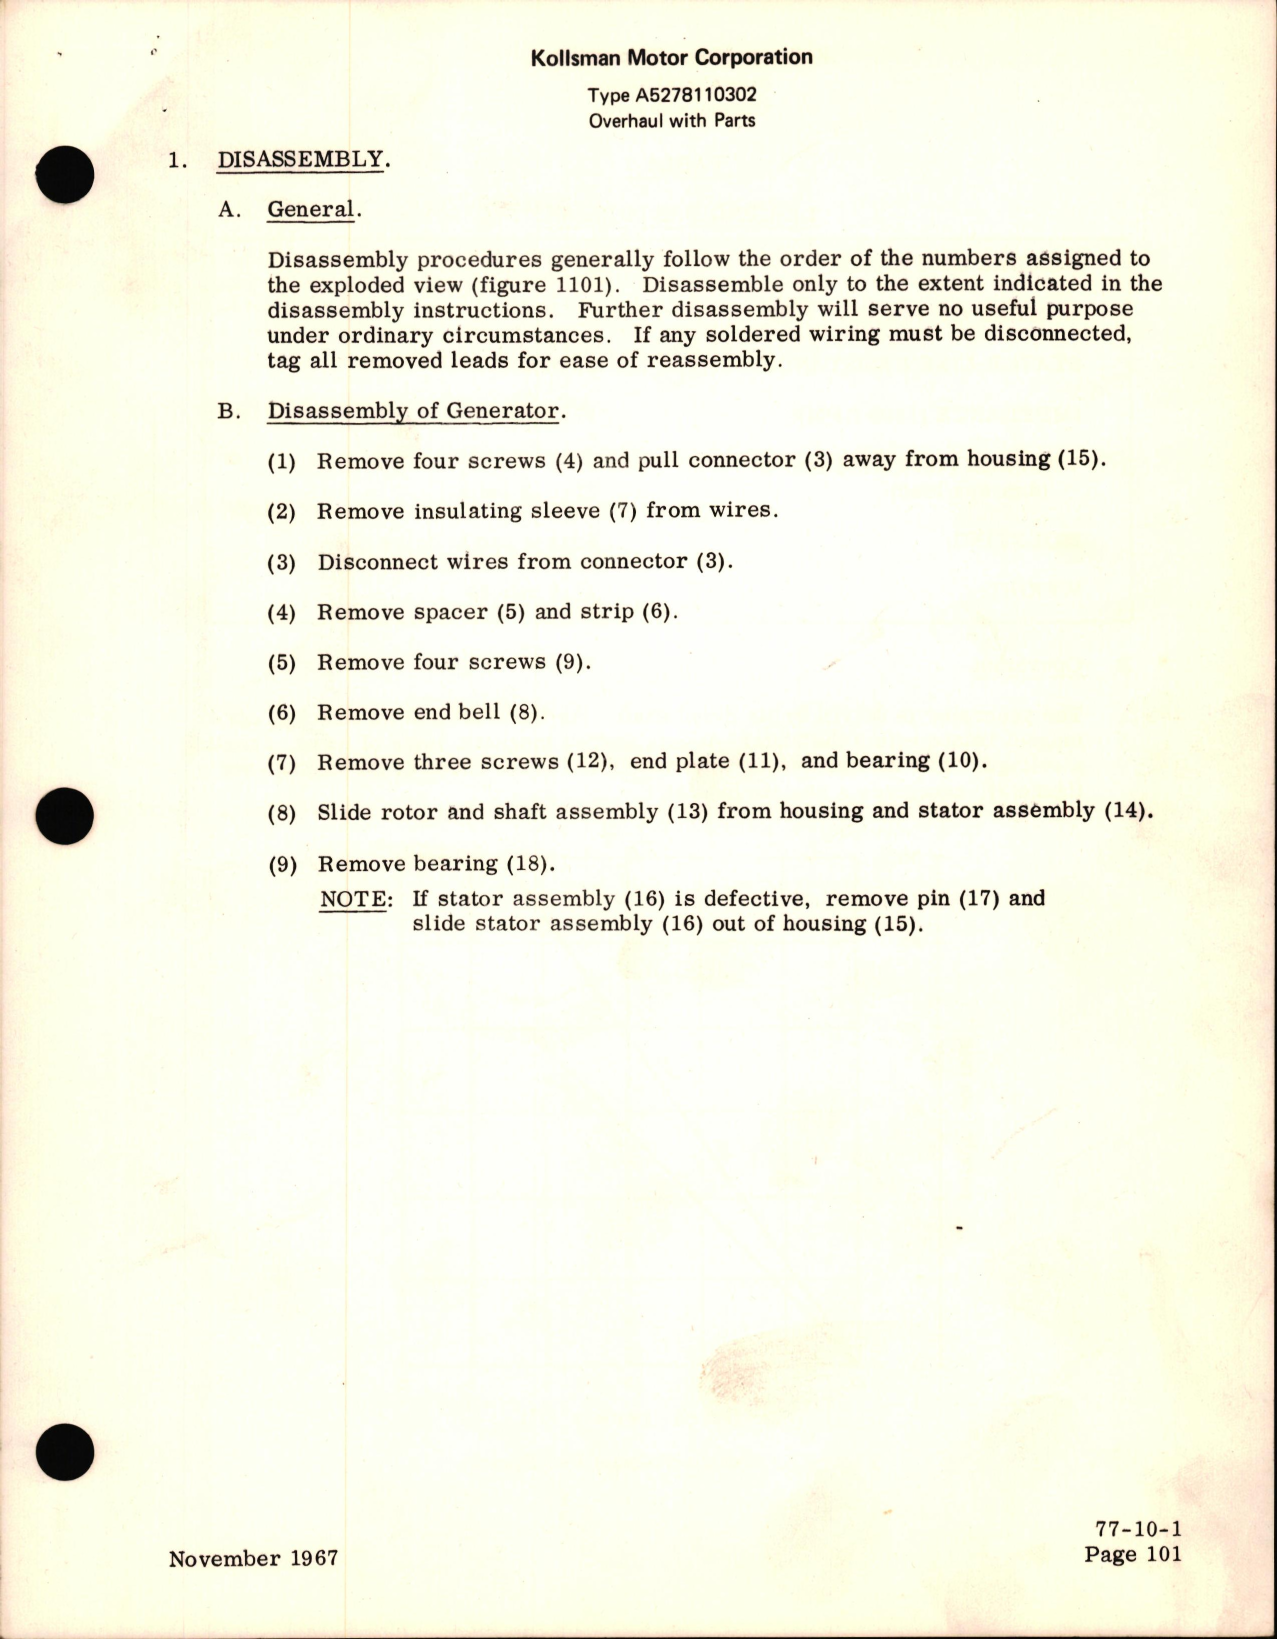 Sample page 7 from AirCorps Library document: Overhaul Instructions with Parts for Tachometer Generator - Type A5278110302 